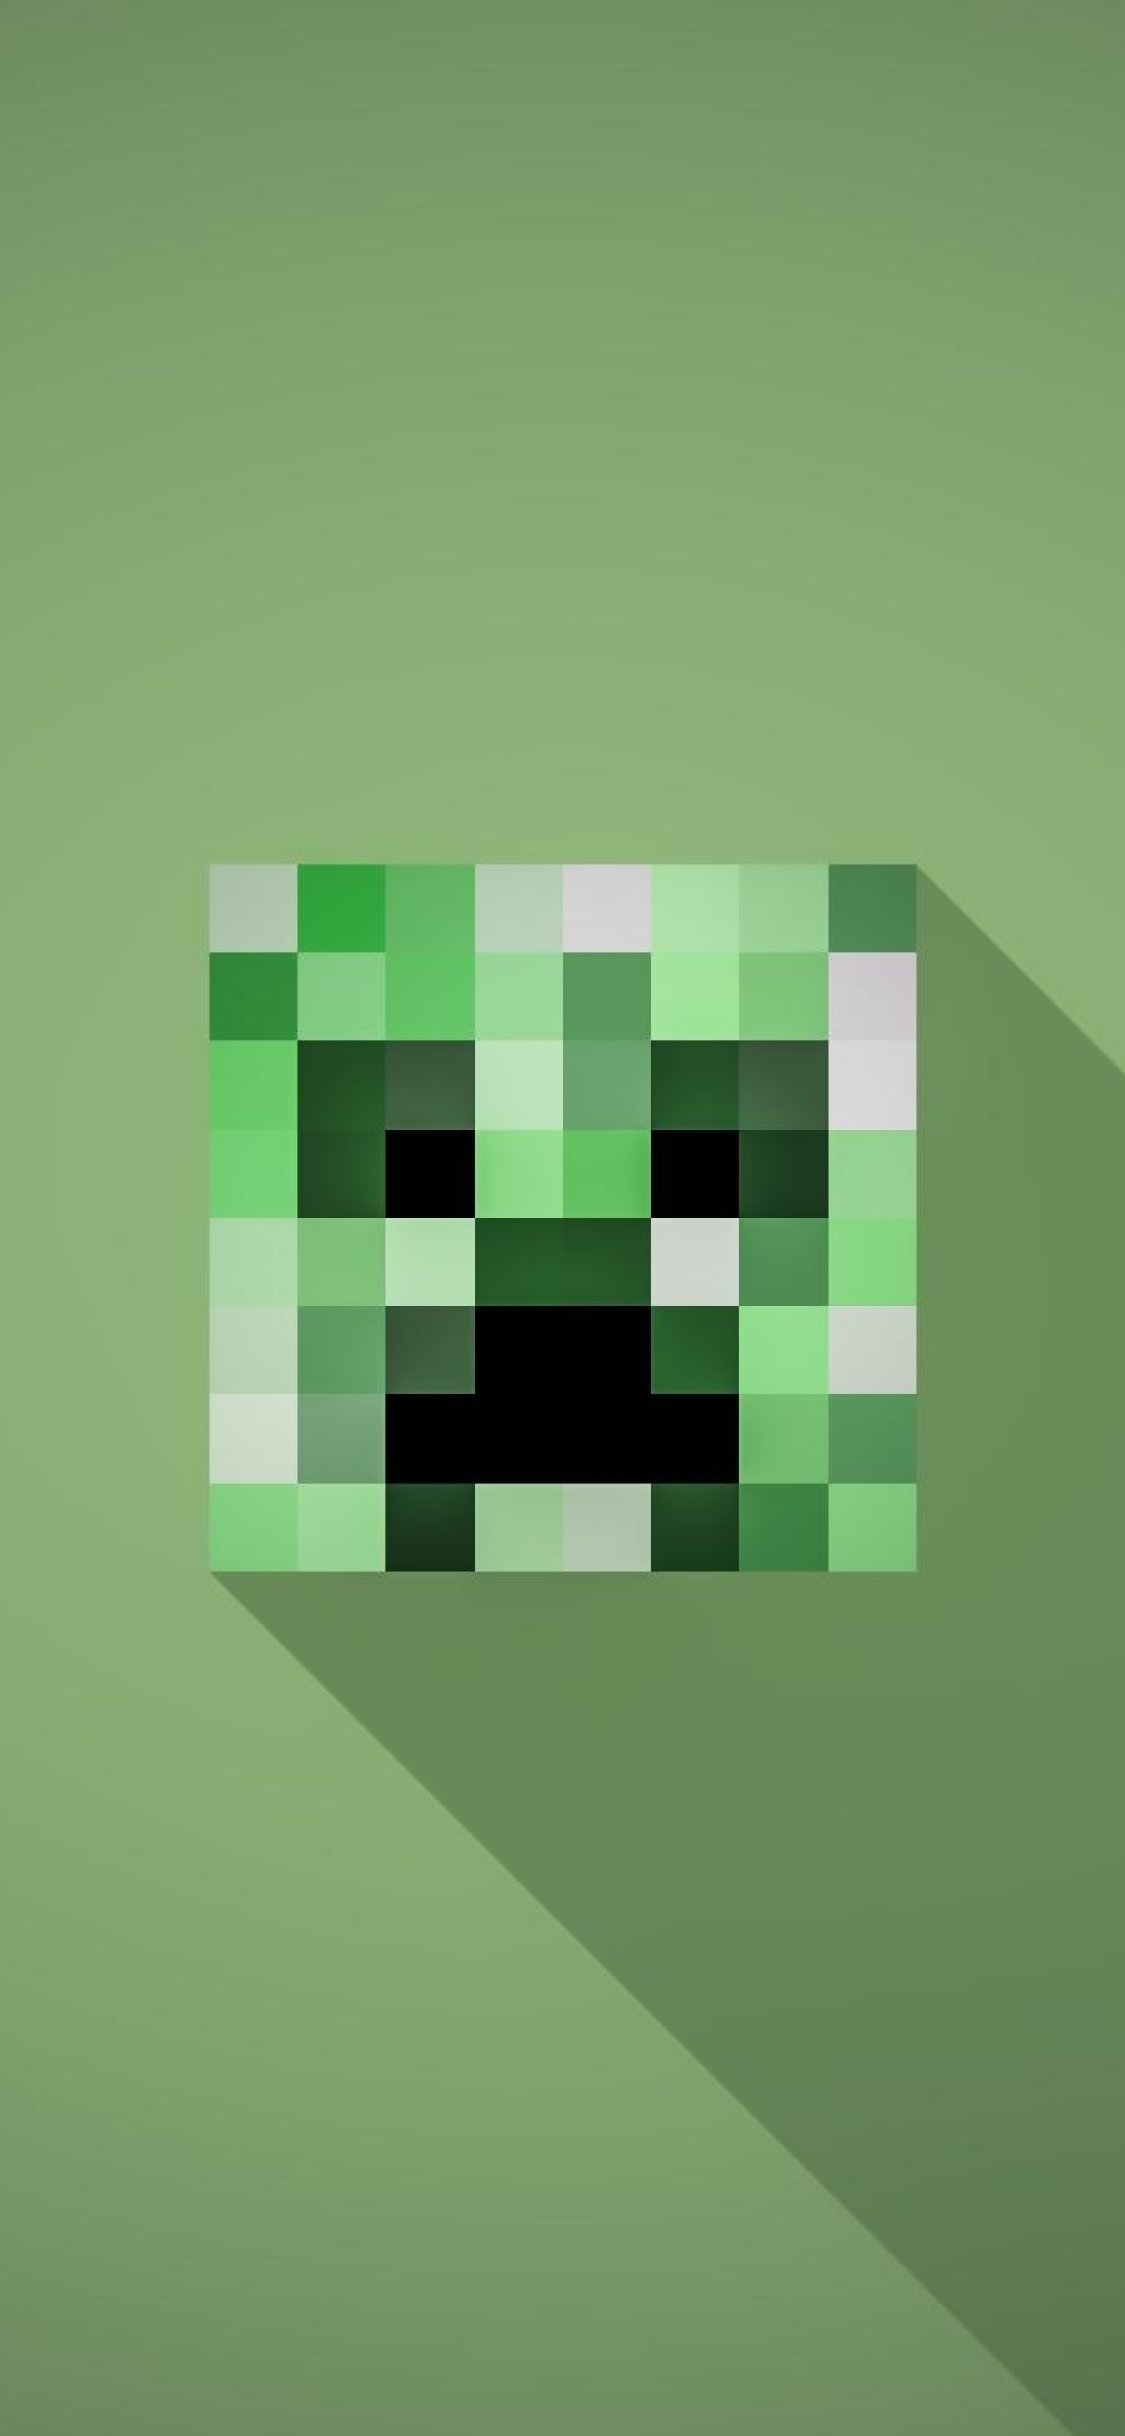 Minecraft iPhone Wallpaper I by Caboose6789 on DeviantArt